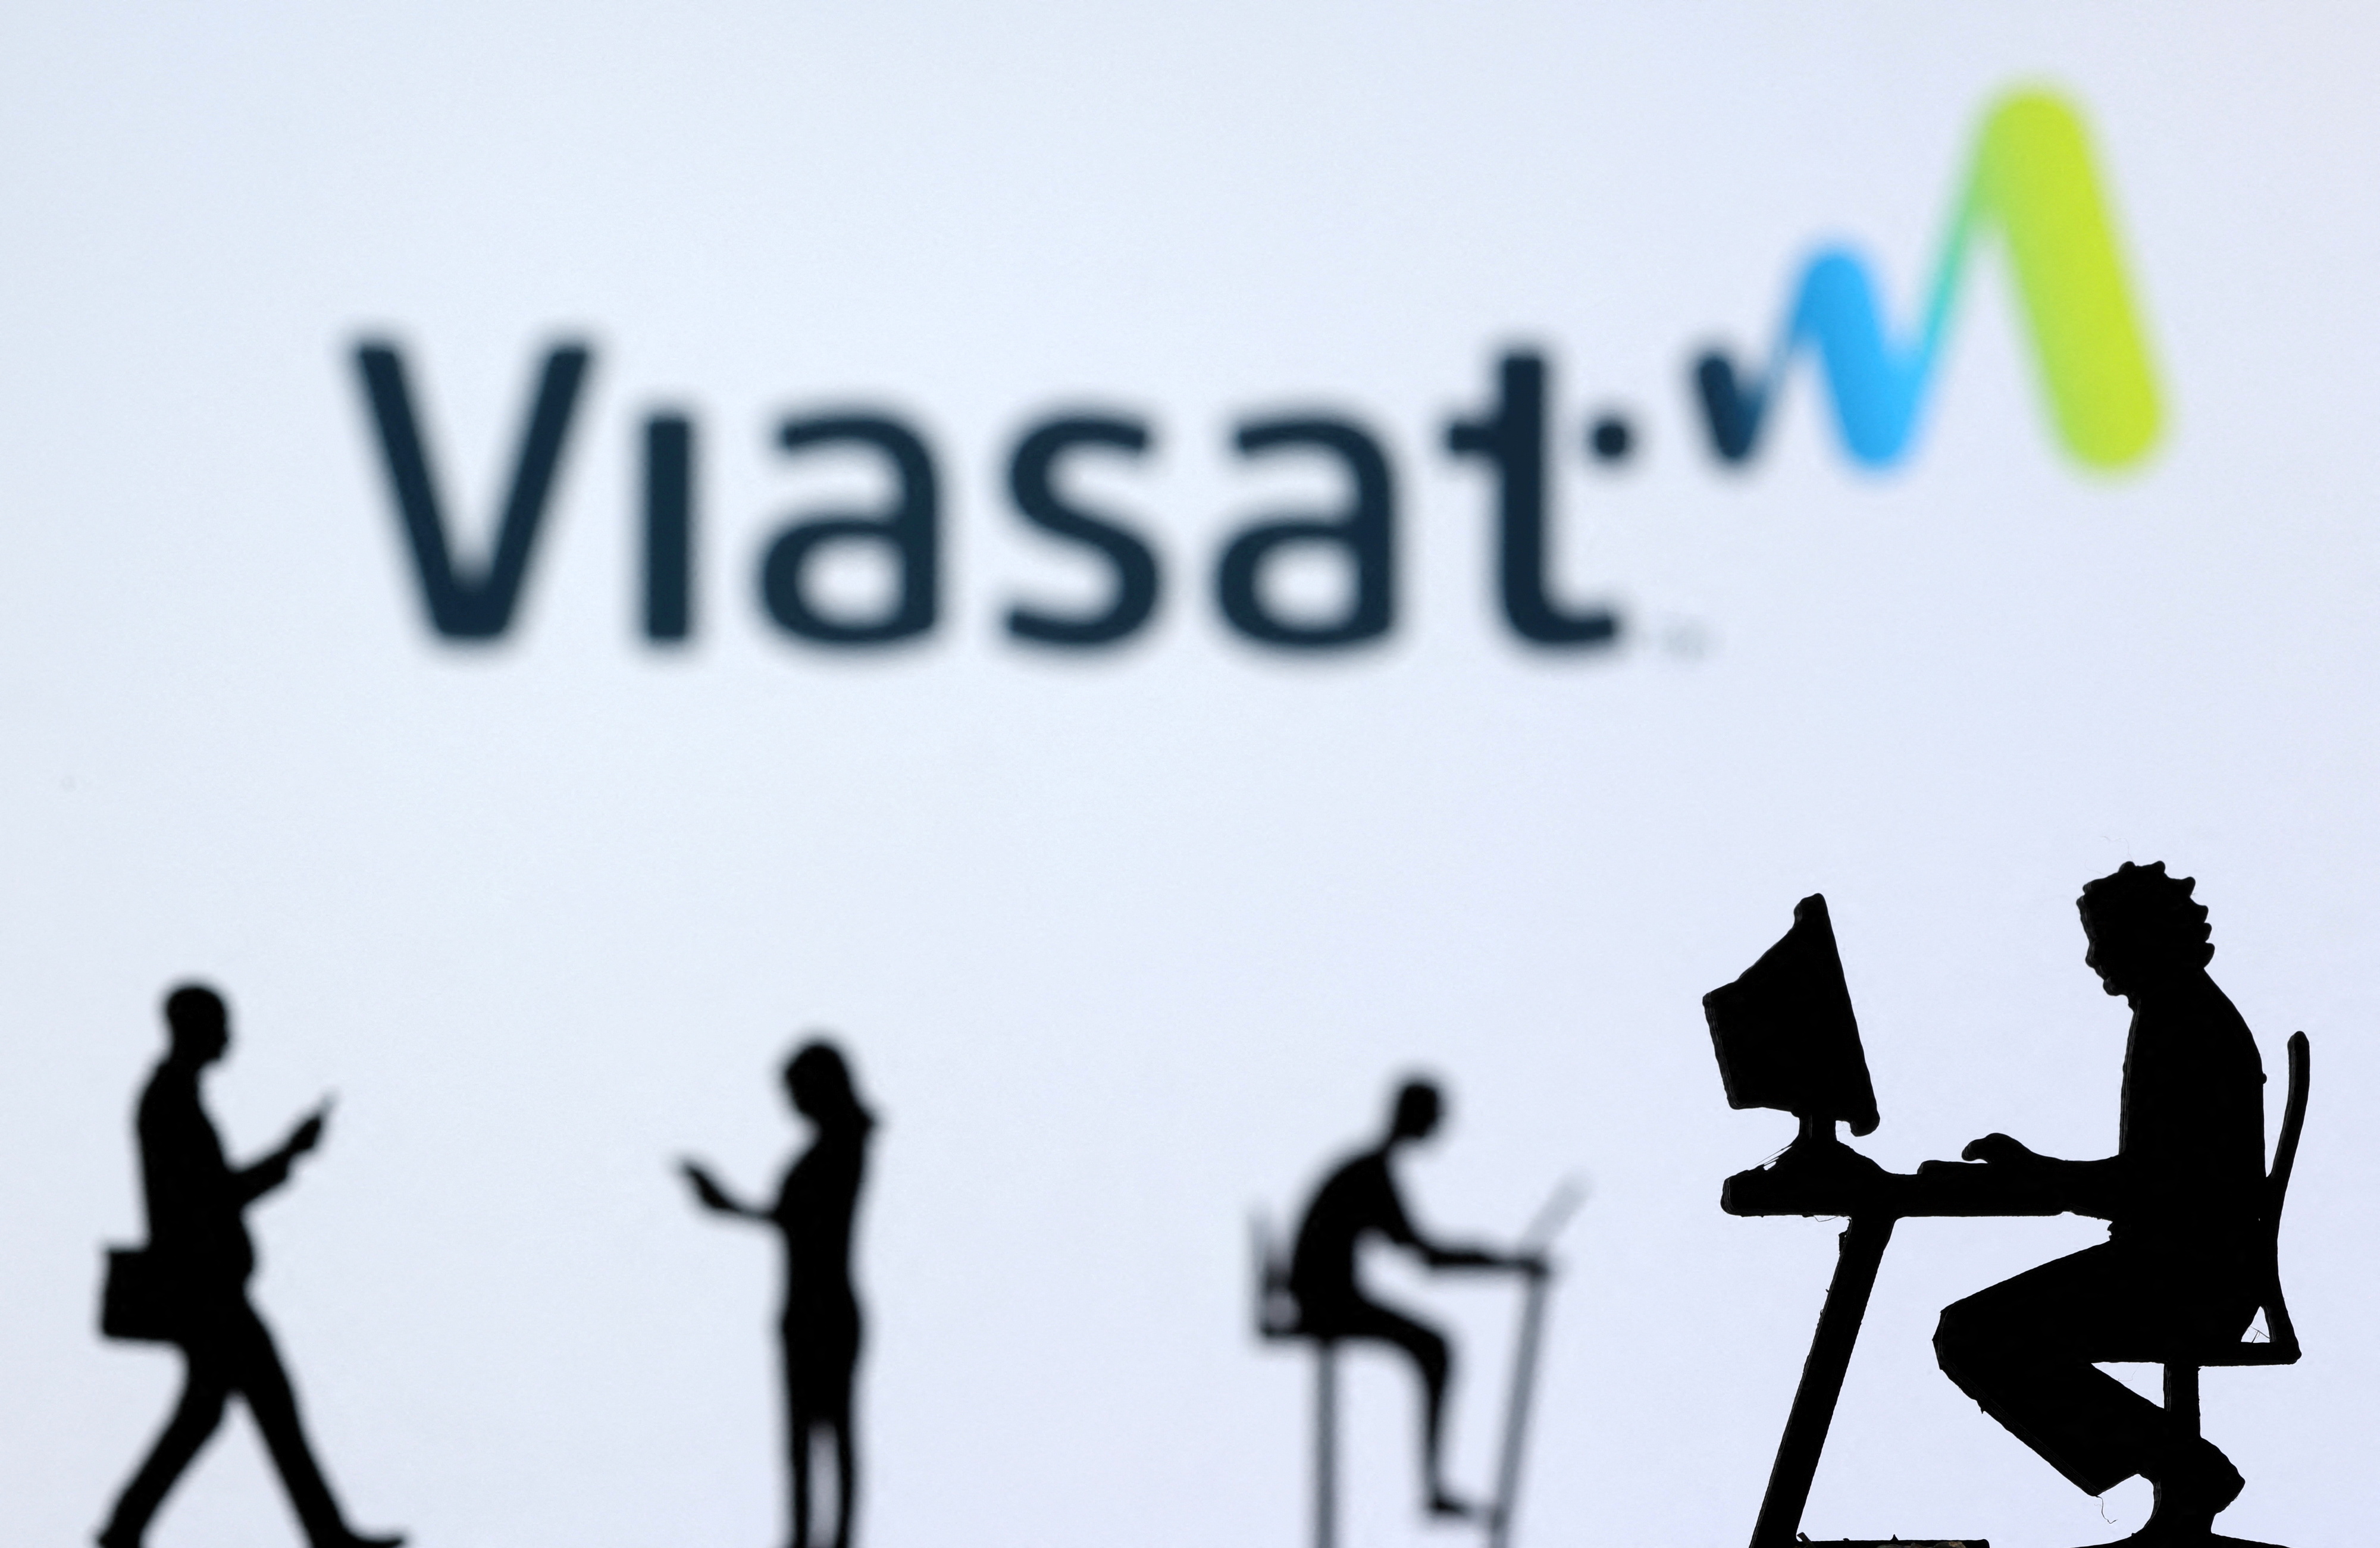 Illustration shows small toy figures with laptops and smartphones in front of displayed Viasat Internet logo